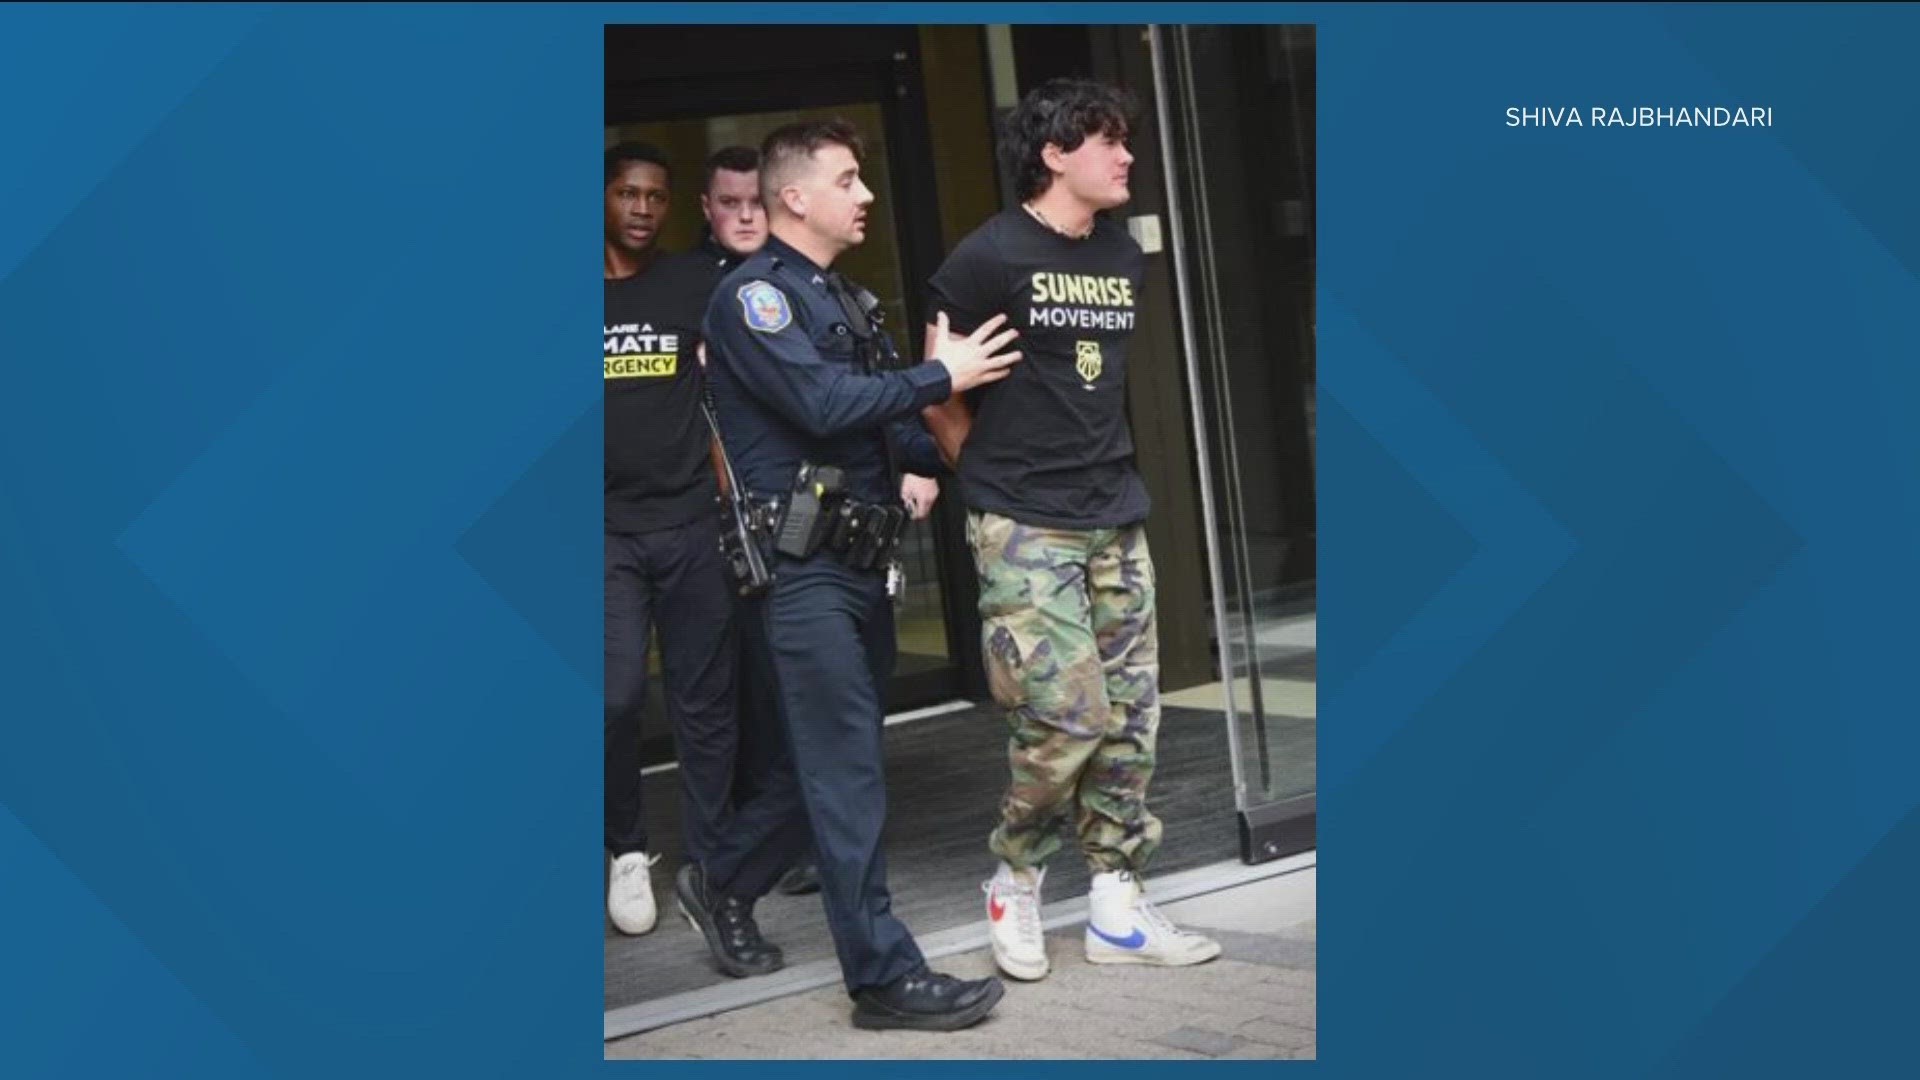 Shiva Rajbhandari was one of 21 people arrested in Wilmington, Delaware, after entering Biden campaign headquarters to speak with his staff about campaign promises.